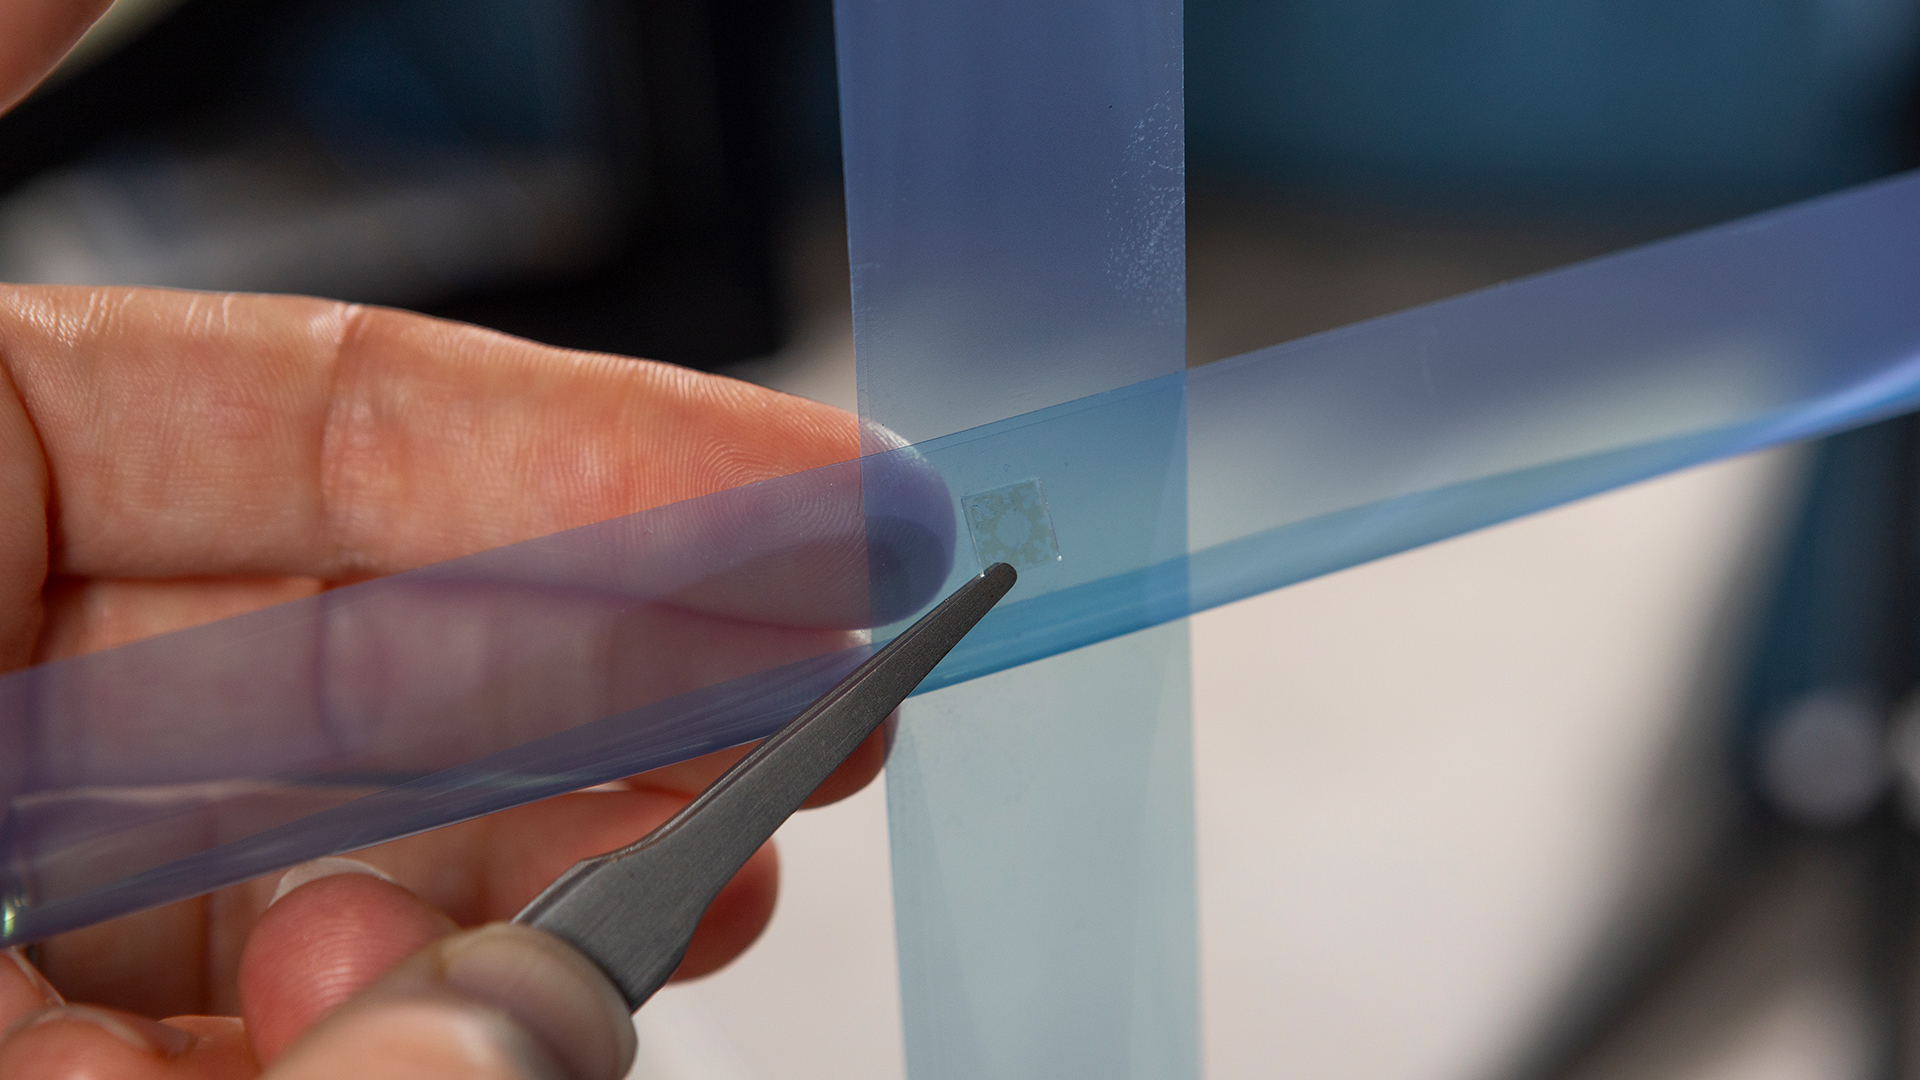 Researcher's hand supports suspended blue strips of film that are crossed, the intersection of the strips contains tiny electronic square device.